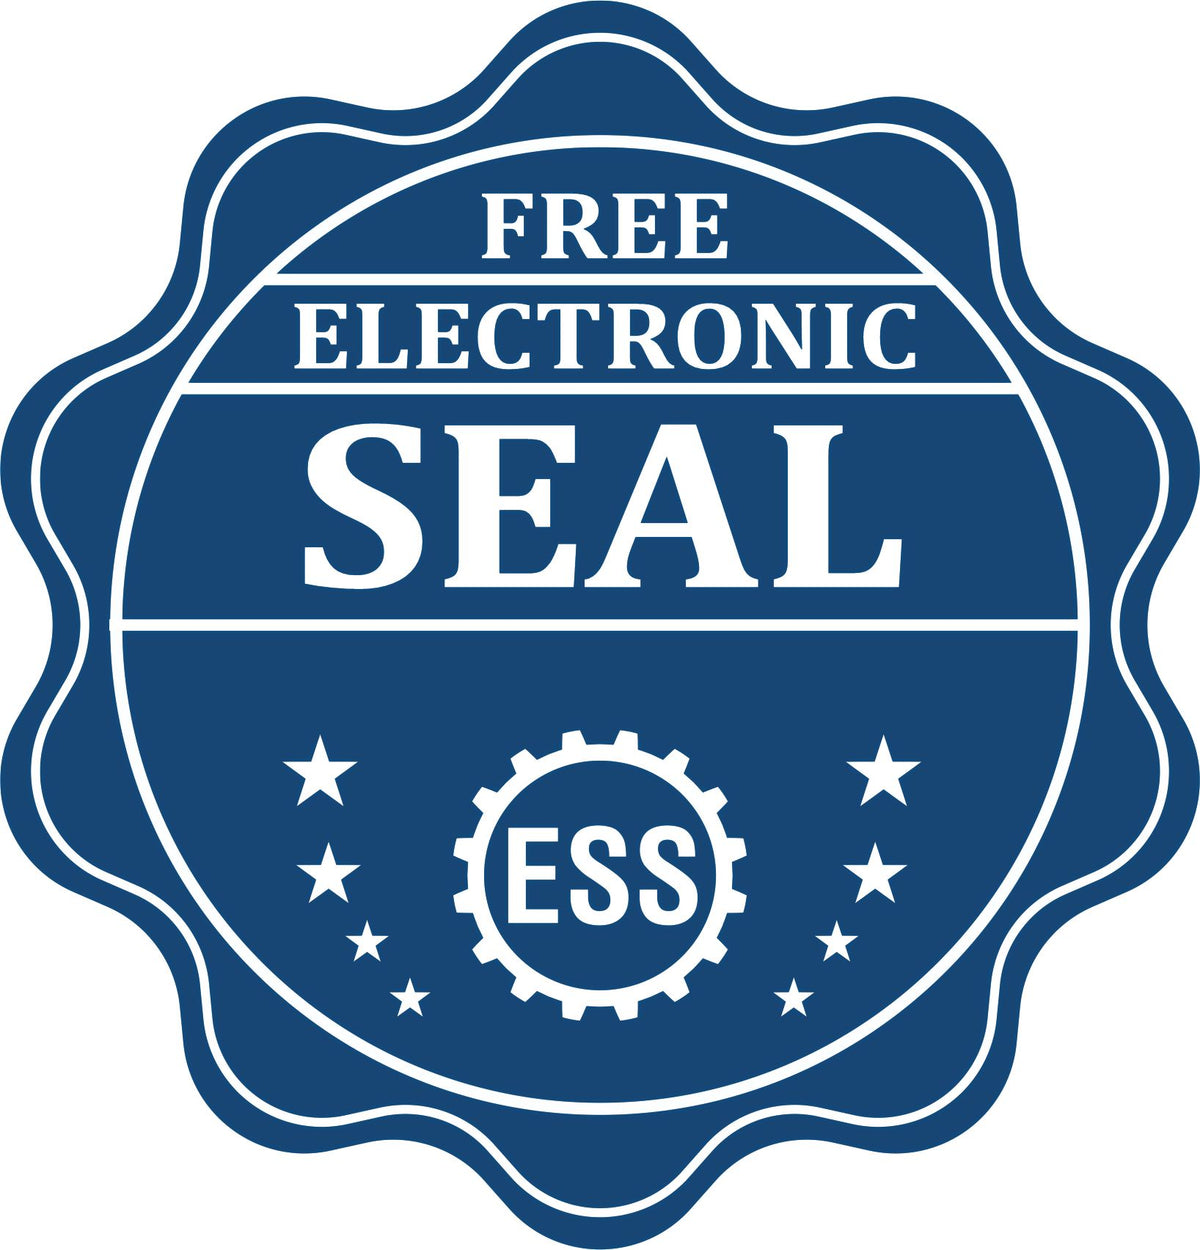 A badge showing a free electronic seal for the Gift North Dakota Engineer Seal with stars and the ESS gear on the emblem.